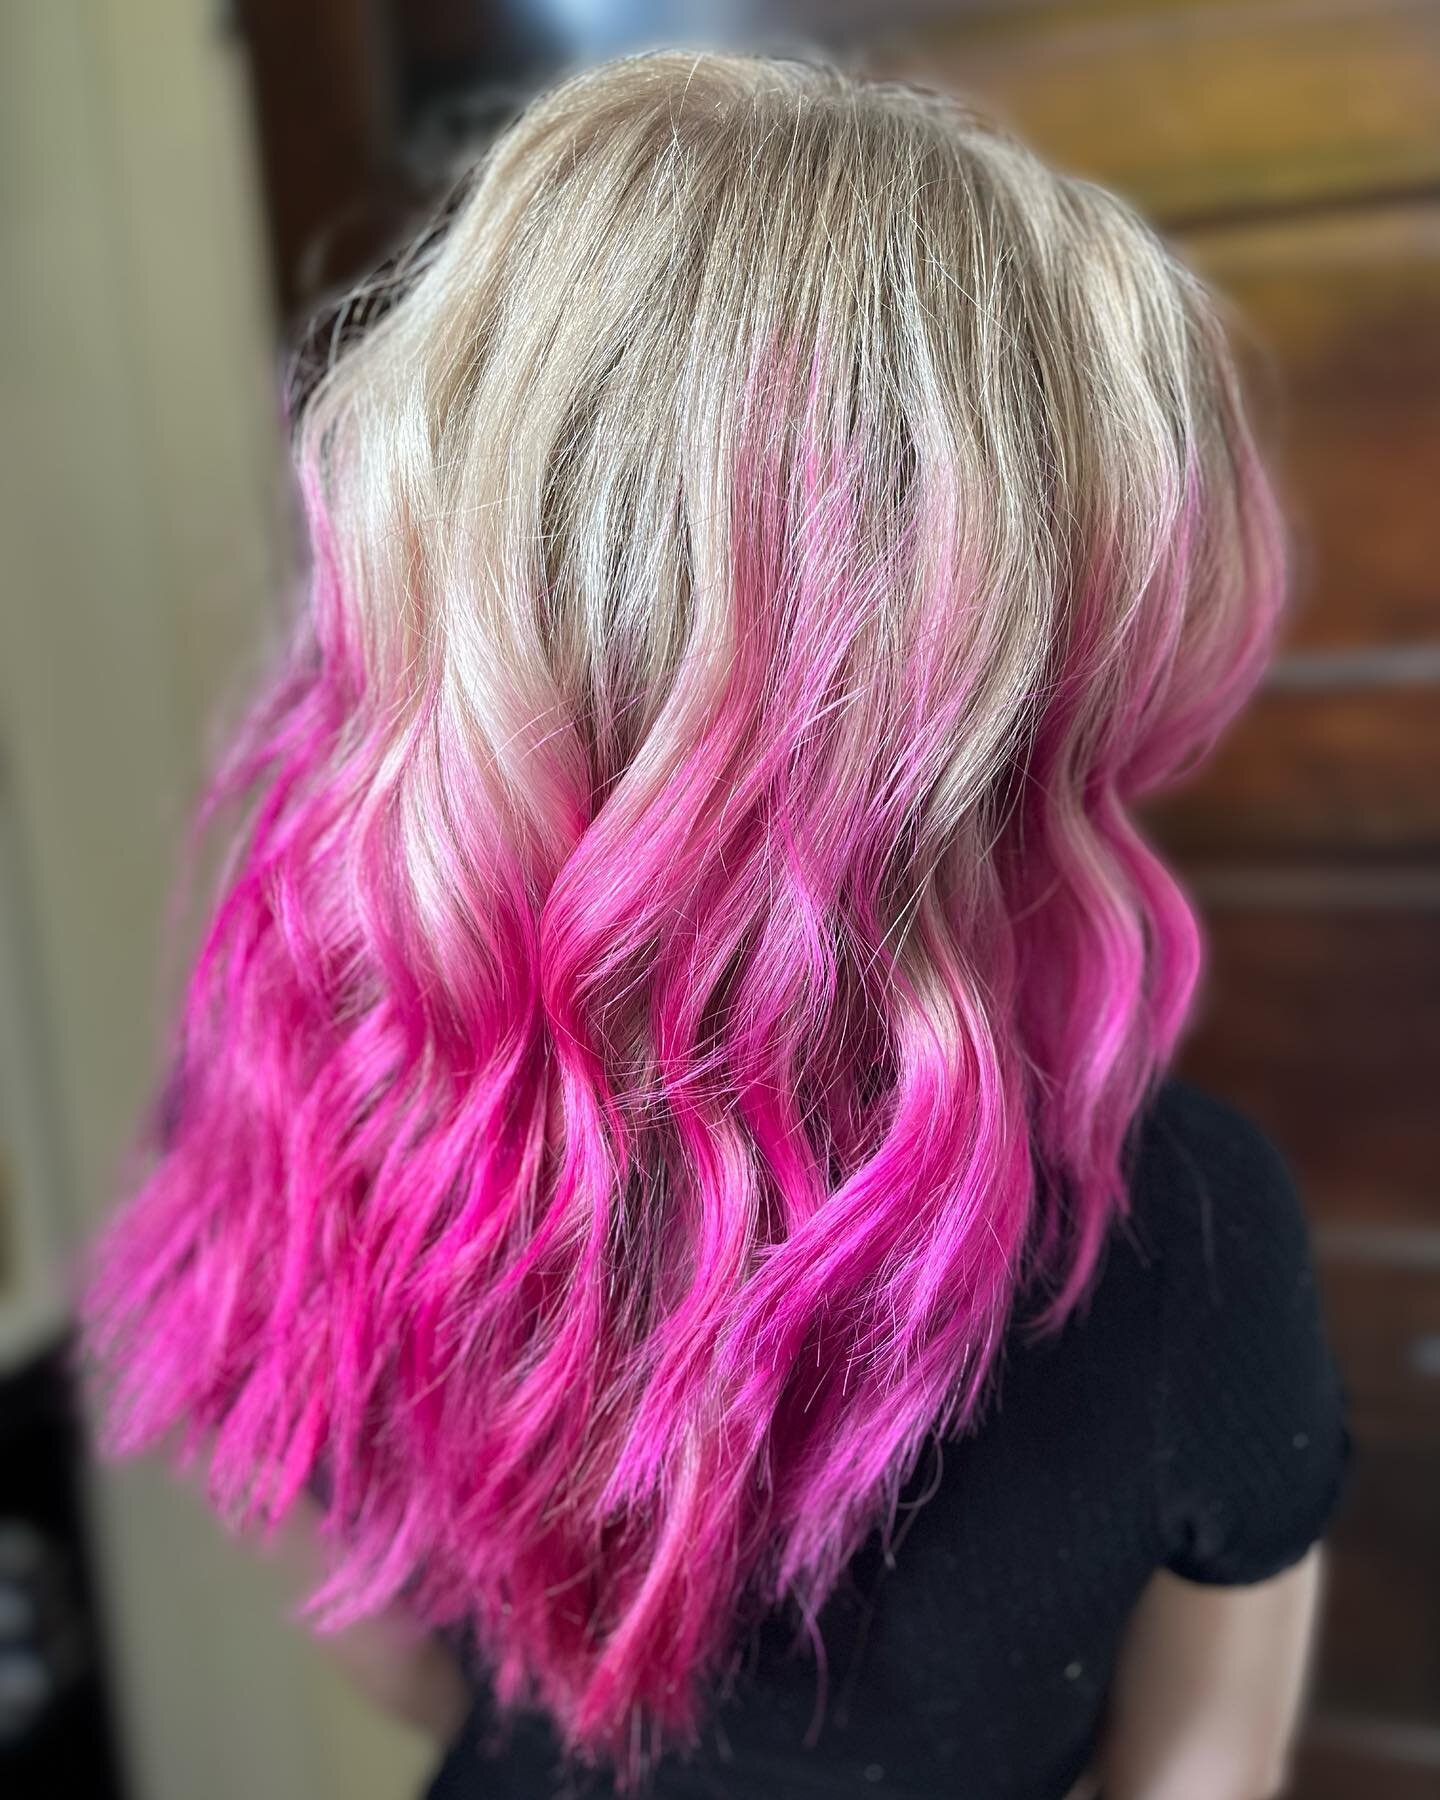 If you know me, you know I am a NATURAL GAL! You will usually catch me doing lived in/dimensional hair color. 
UNTIL, I stepped out of my comfort zone to create this insanely rad style for my coworker! Thankful for all the knowledge and support I&rsq